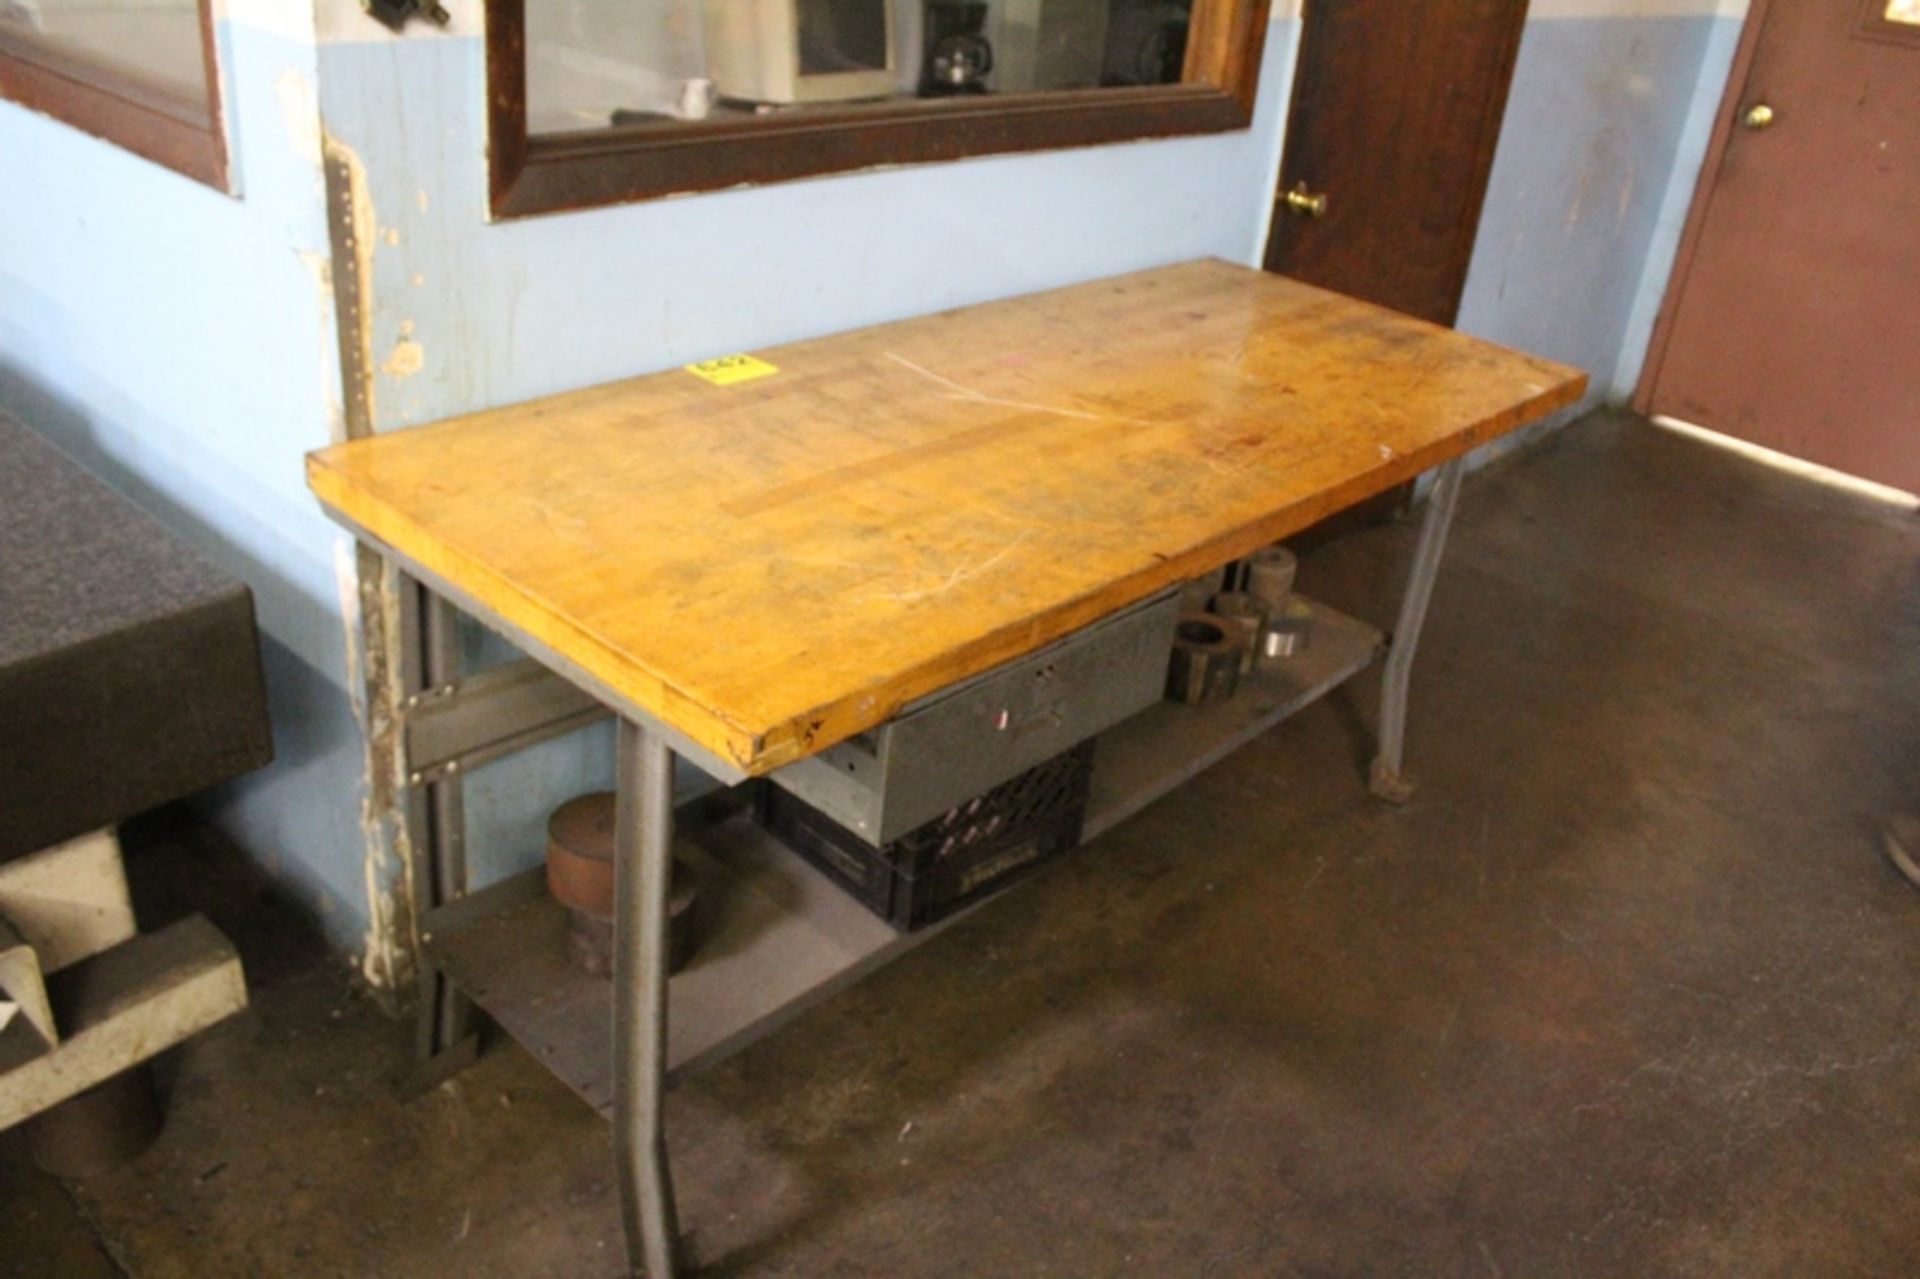 STEEL SHOP TABLE WITH WOOD TOP, 34" X 72" X 30"